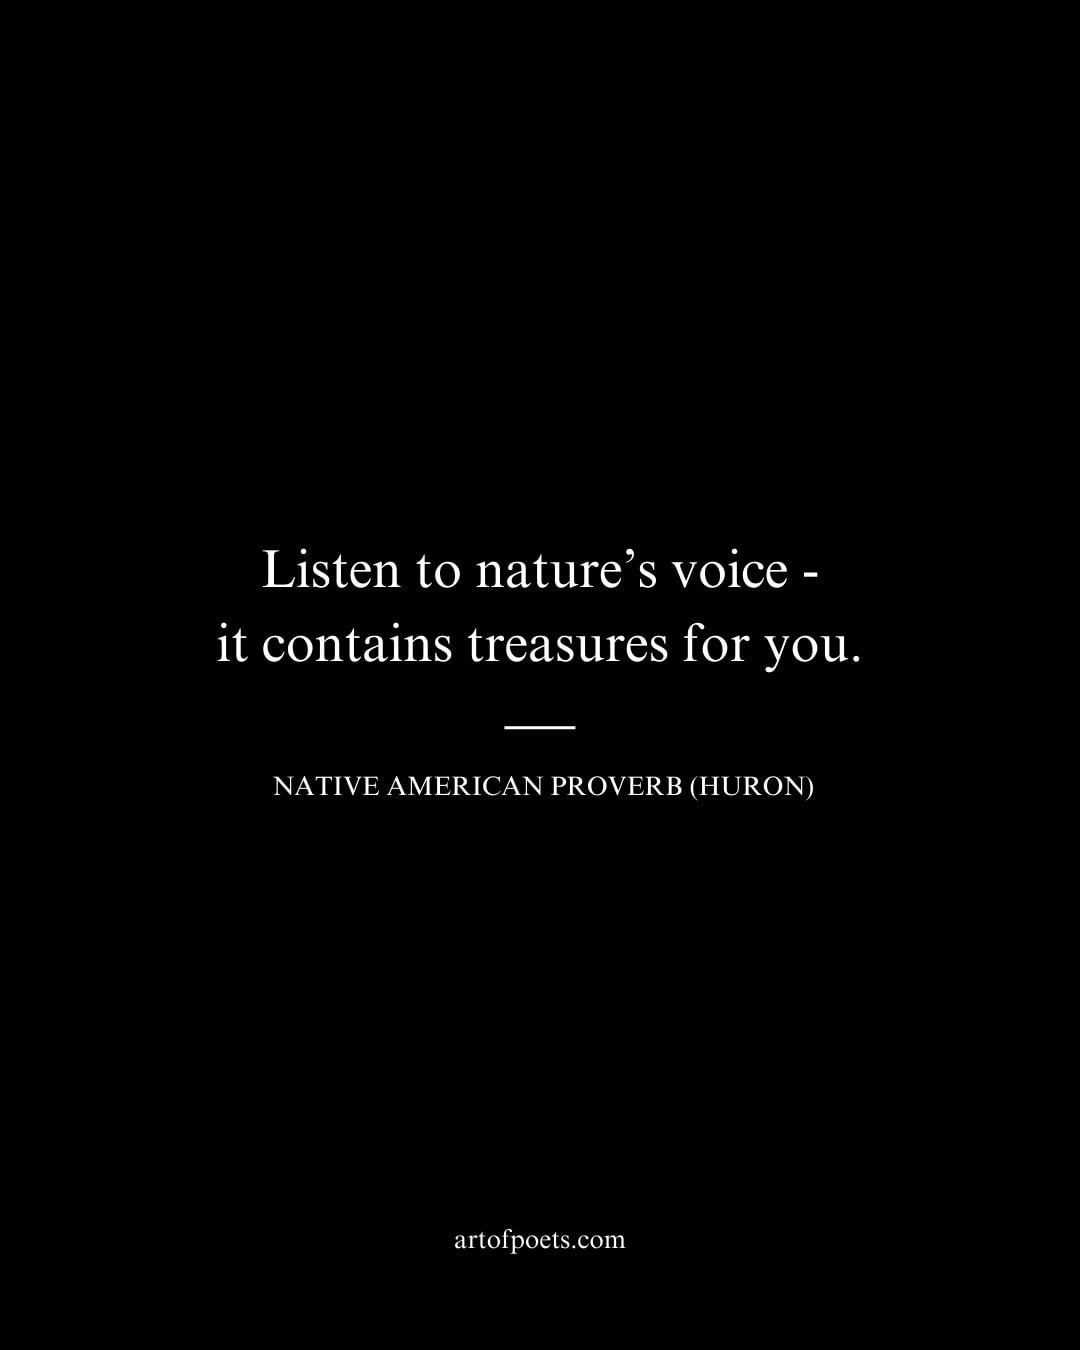 Listen to natures voice—it contains treasures for you